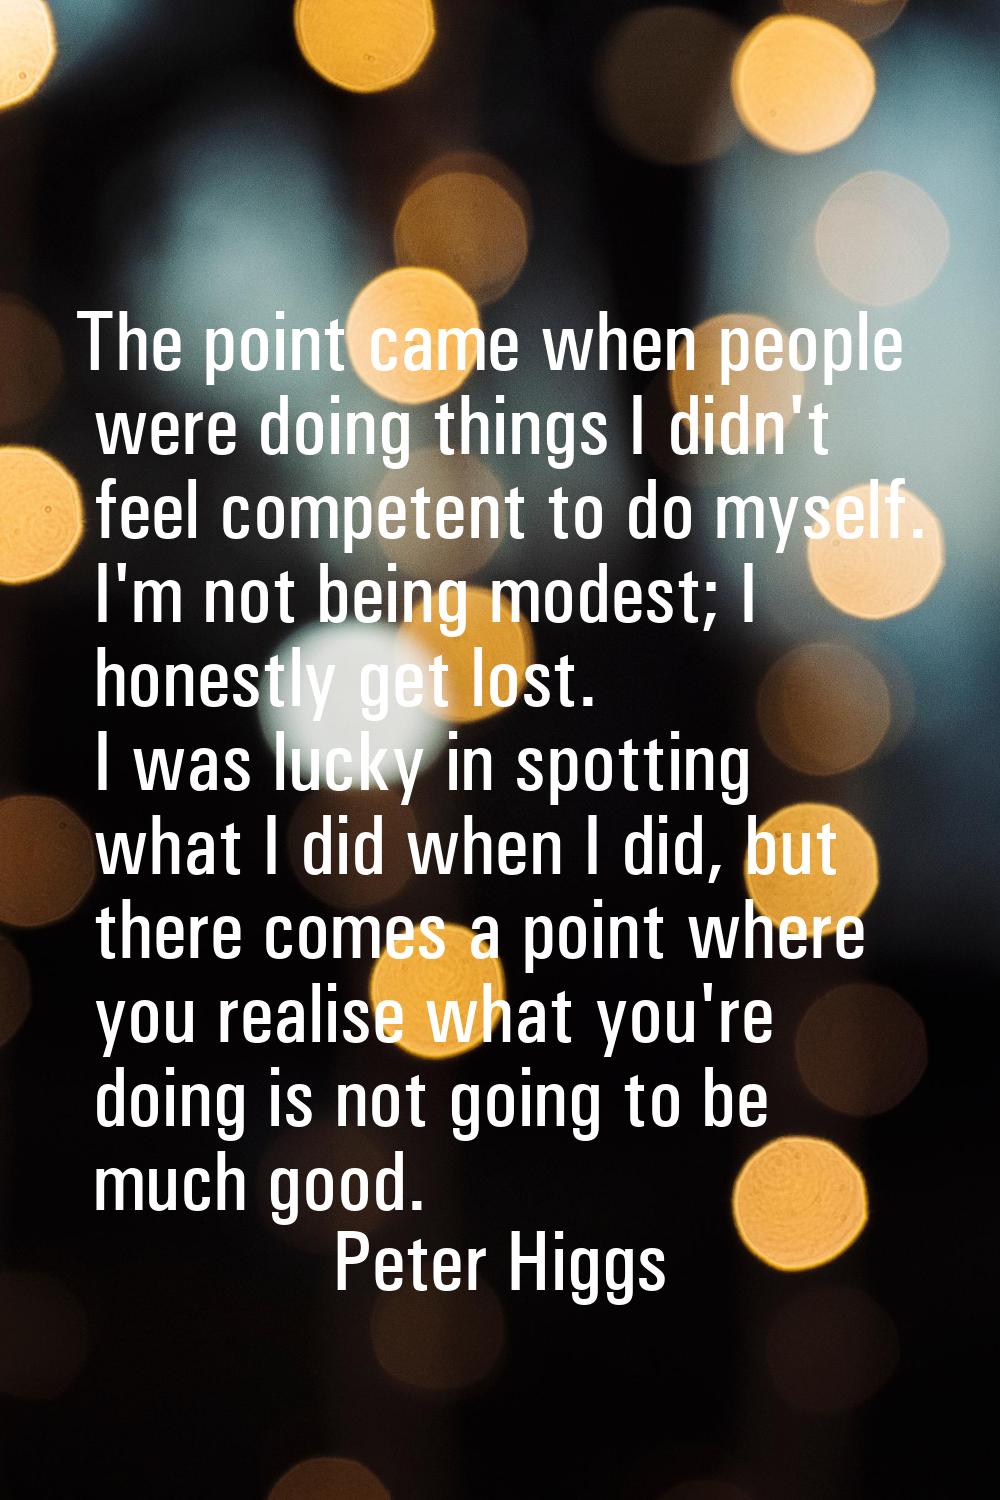 The point came when people were doing things I didn't feel competent to do myself. I'm not being mo